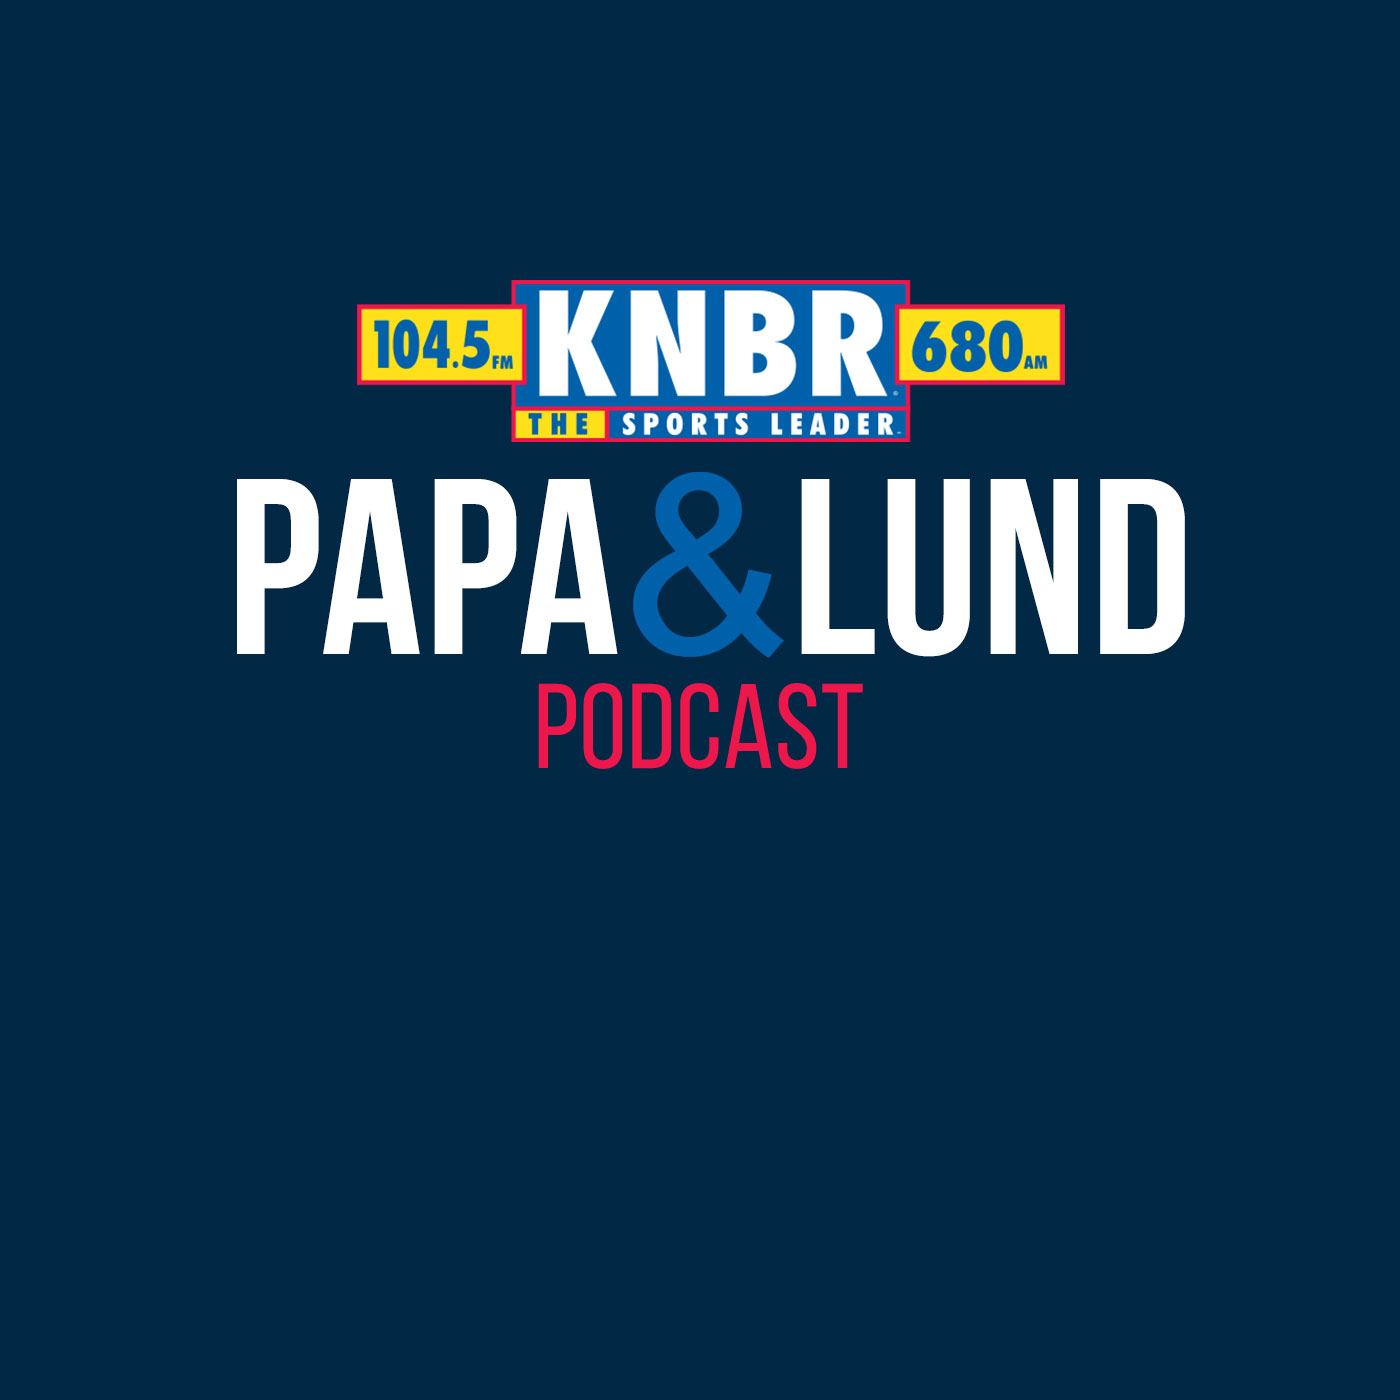 4-7 Andrew Baggarly recaps the Giants week 1 of the 2023 season and what is trending in the right direction with Papa & Lund